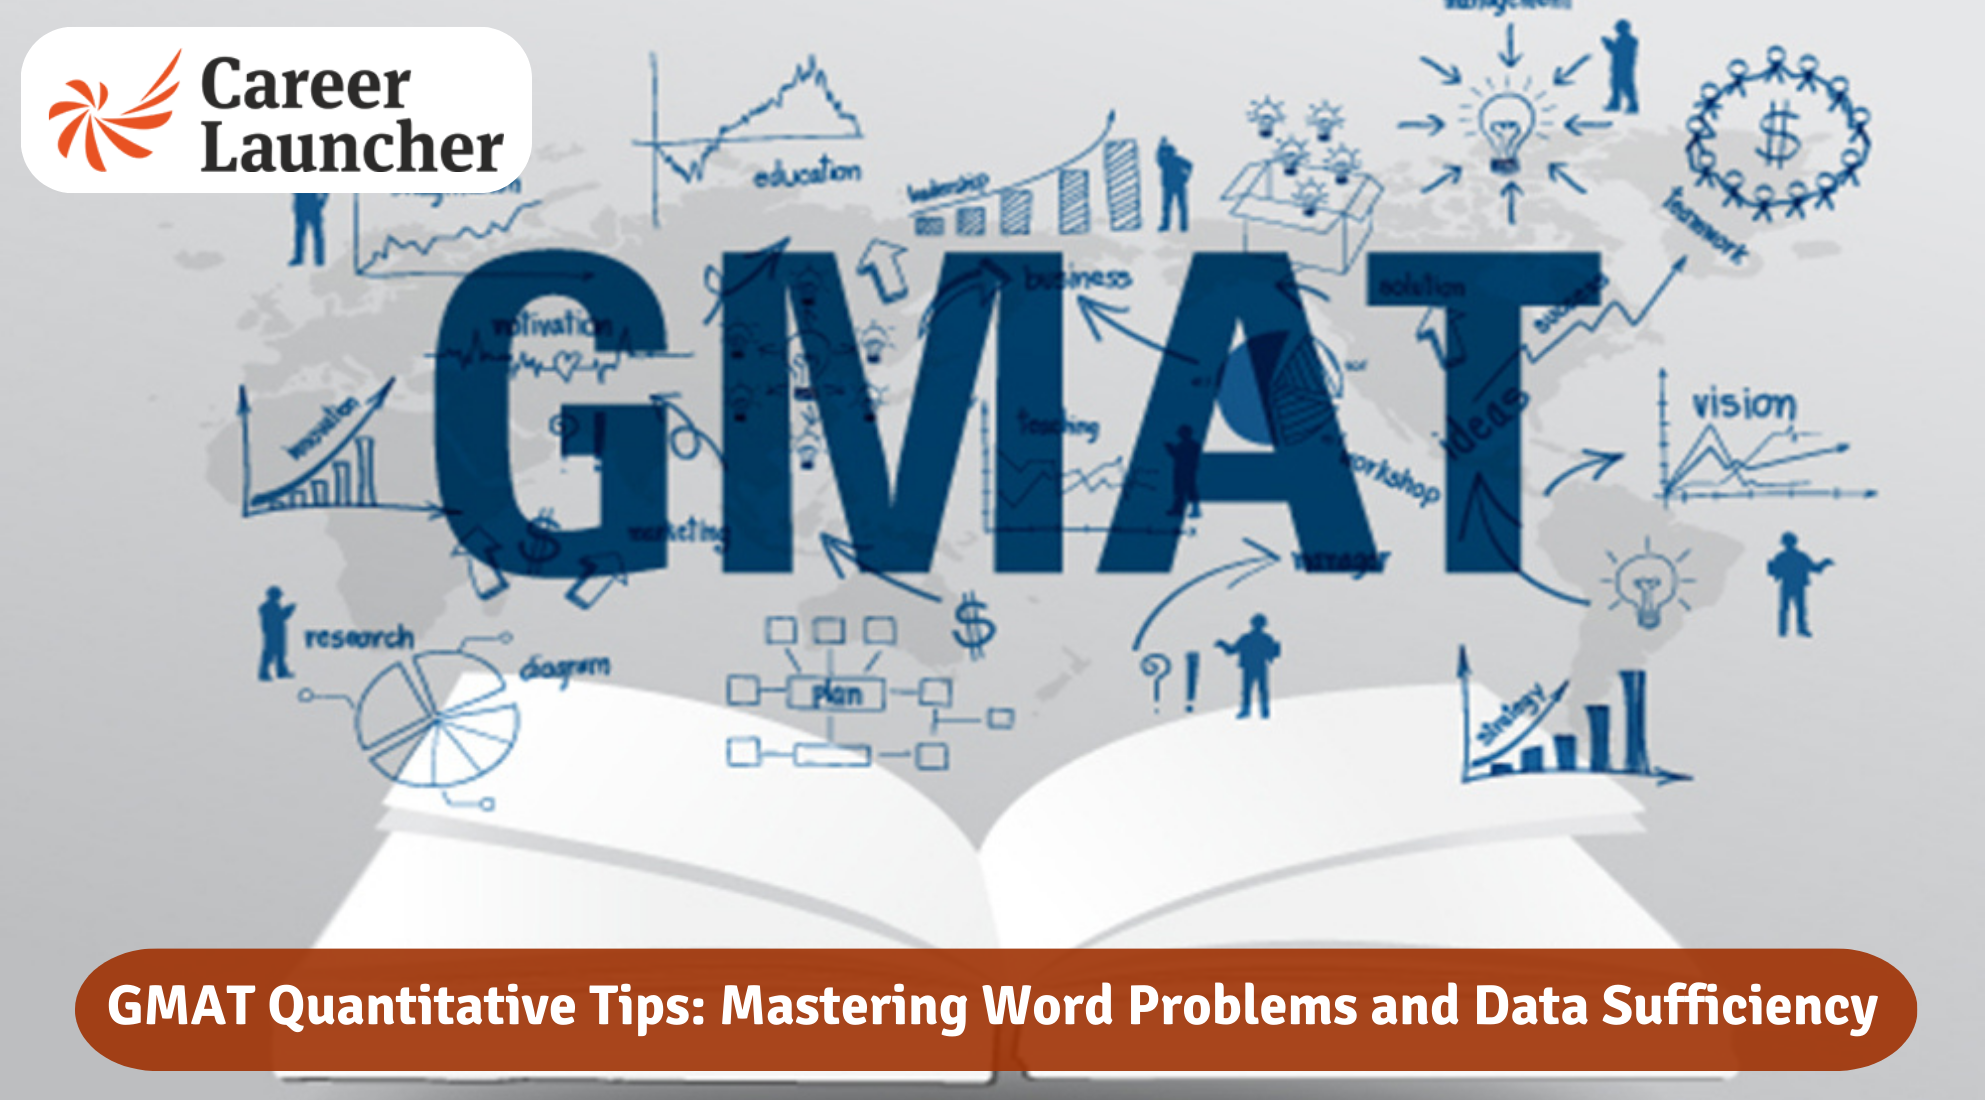 GMAT Quantitative Tips: Mastering Word Problems and Data Sufficiency